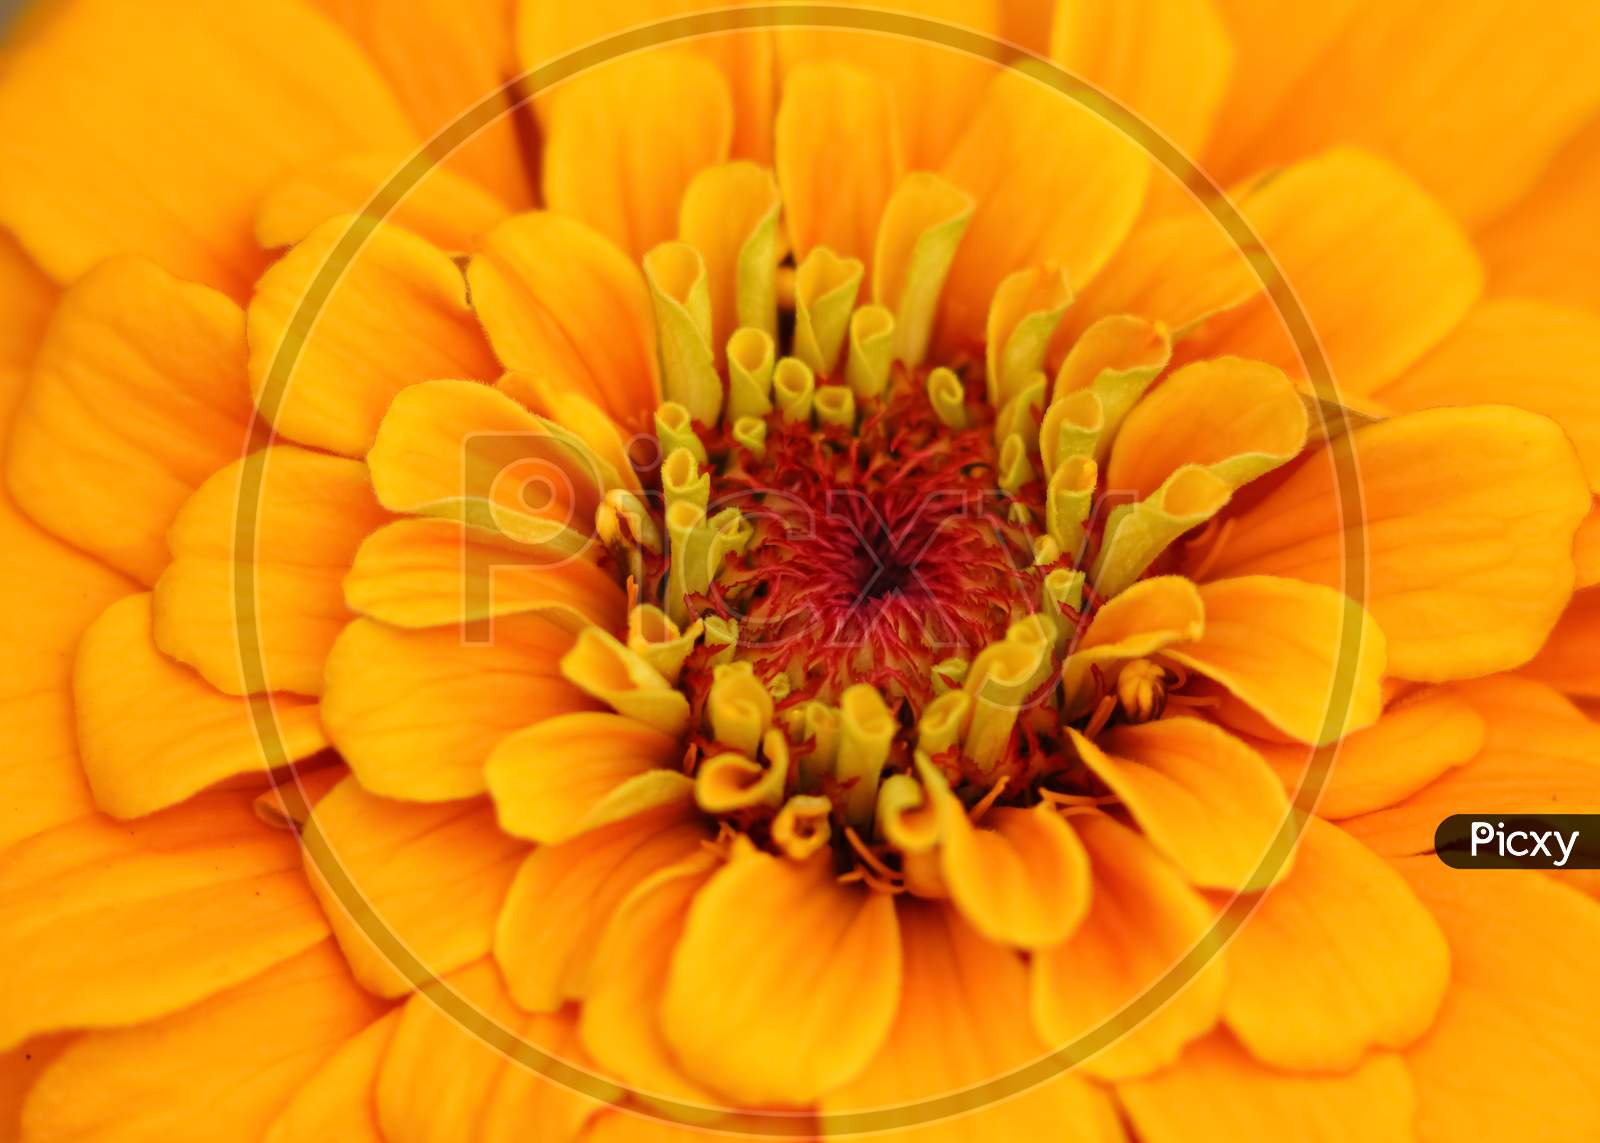 Macro image of a yellow zinnia flower with vibrant and bright colors